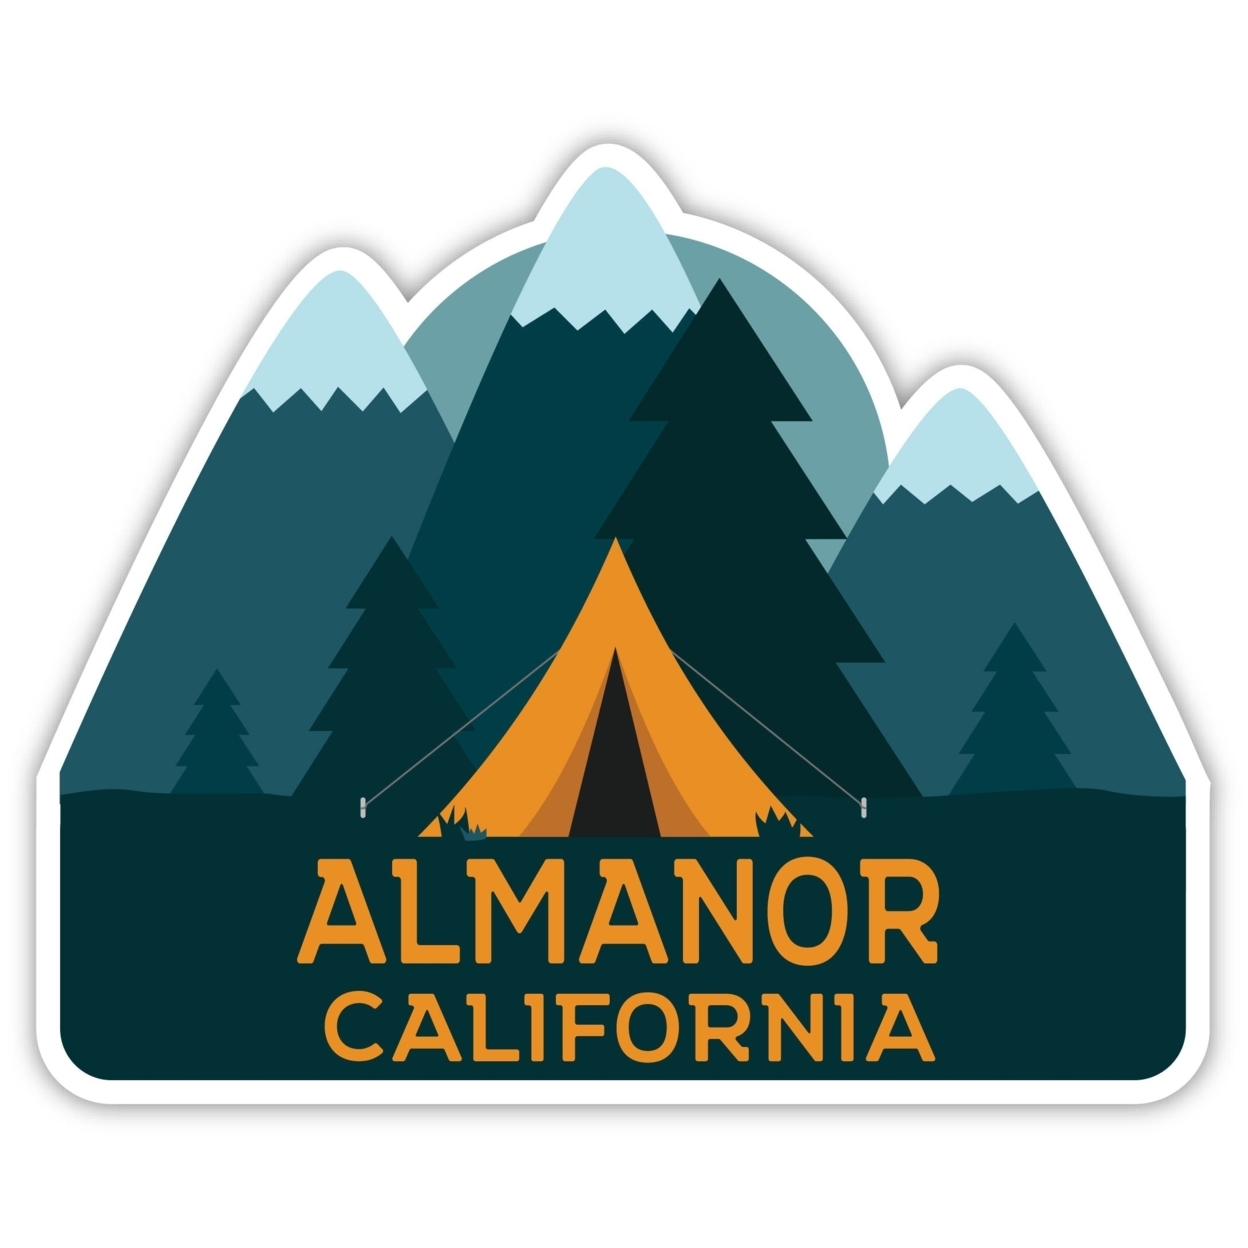 Almanor California Souvenir Decorative Stickers (Choose Theme And Size) - 4-Pack, 2-Inch, Bear